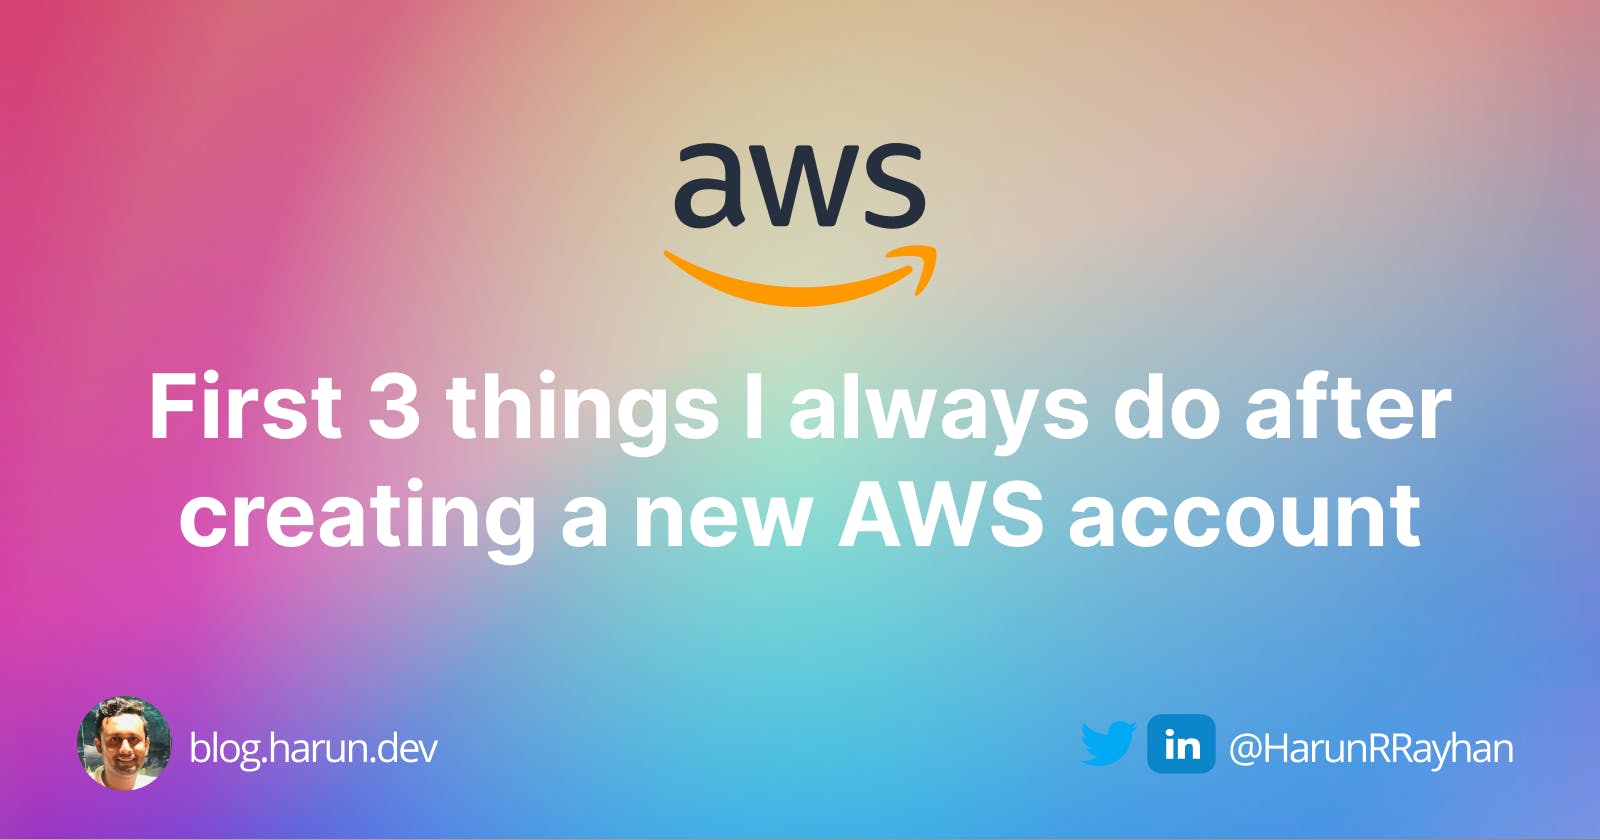 First 3 things I always do after creating a new AWS account